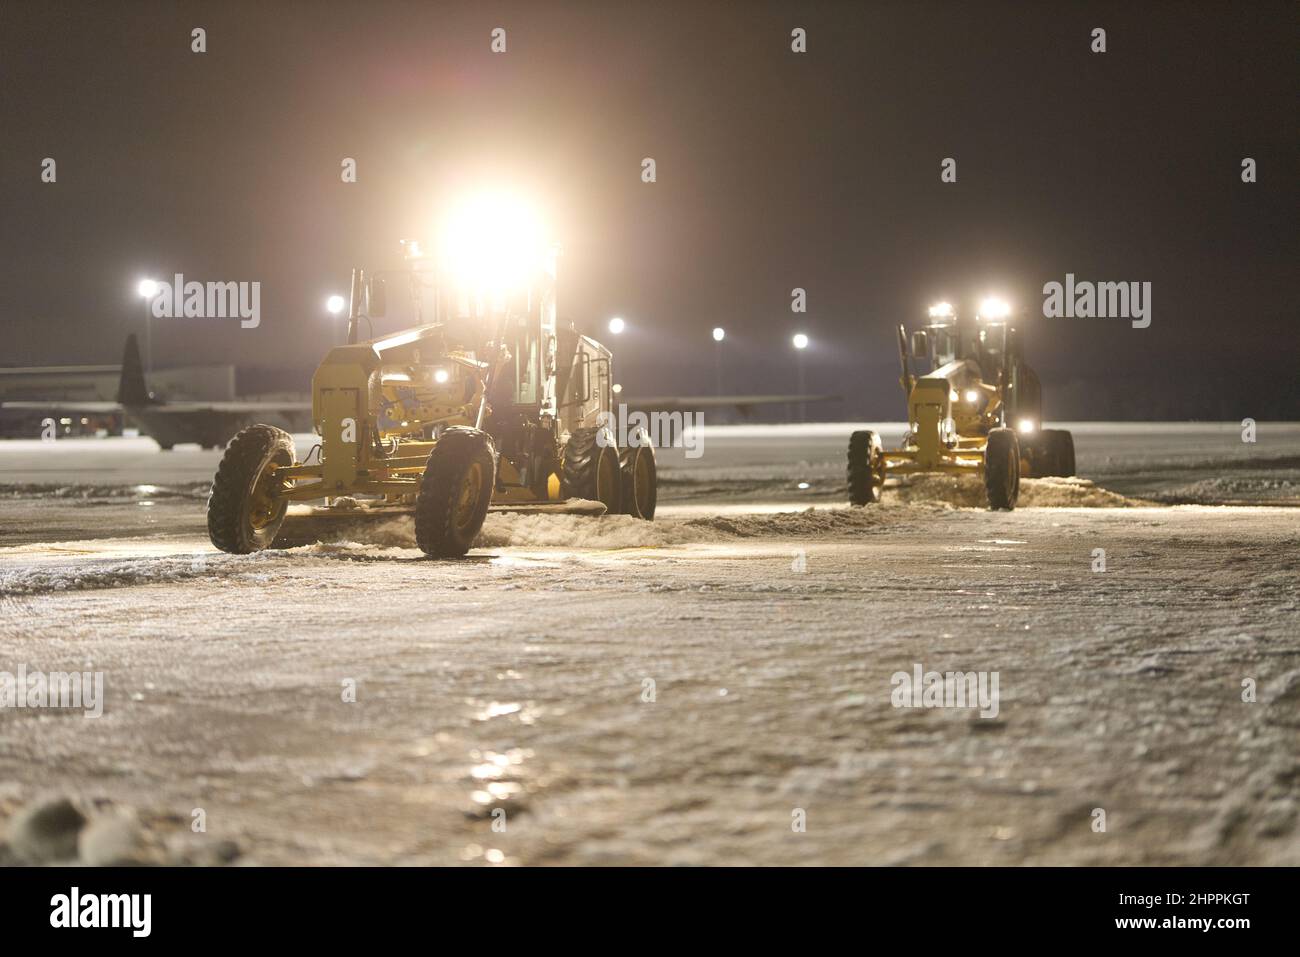 Senior Airman Austin Schafer, 19th Civil Engineer Squadron, left, and Senior Airman Jason Bridgman, 19th CES, right, clear the flightline of snow and ice following a winter storm at Little Rock Air Force Base, Arkansas, Feb. 4, 2022. Civil engineers from the 19th CES worked day and night to keep LRAFB operational during Winter Storm Landon. (U.S. Air Force photo by 1st Lt. Daniel Hendrix) Stock Photo